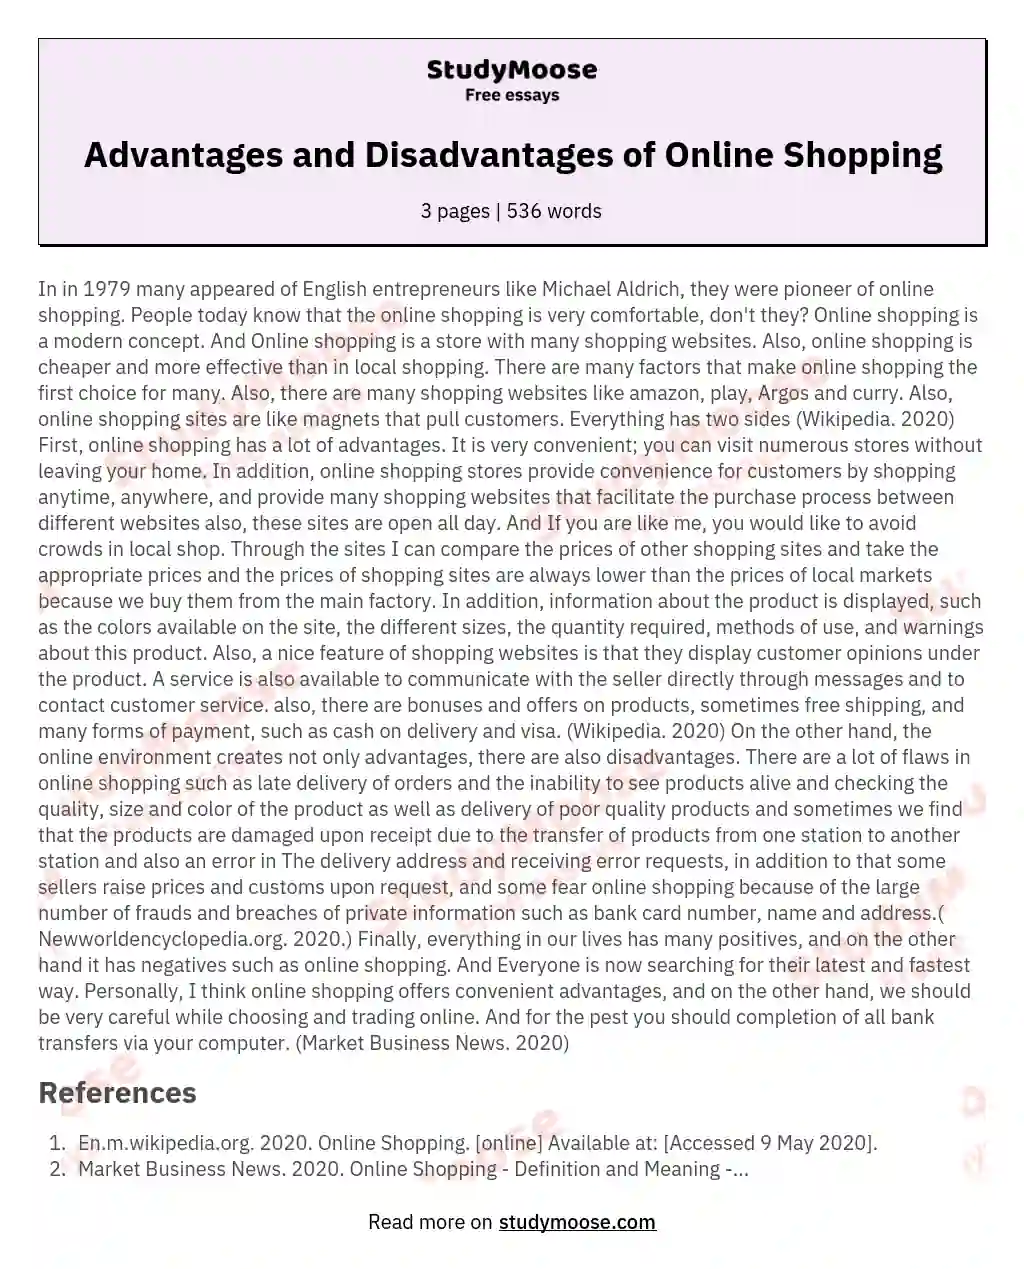 Advantages and Disadvantages of Online Shopping essay